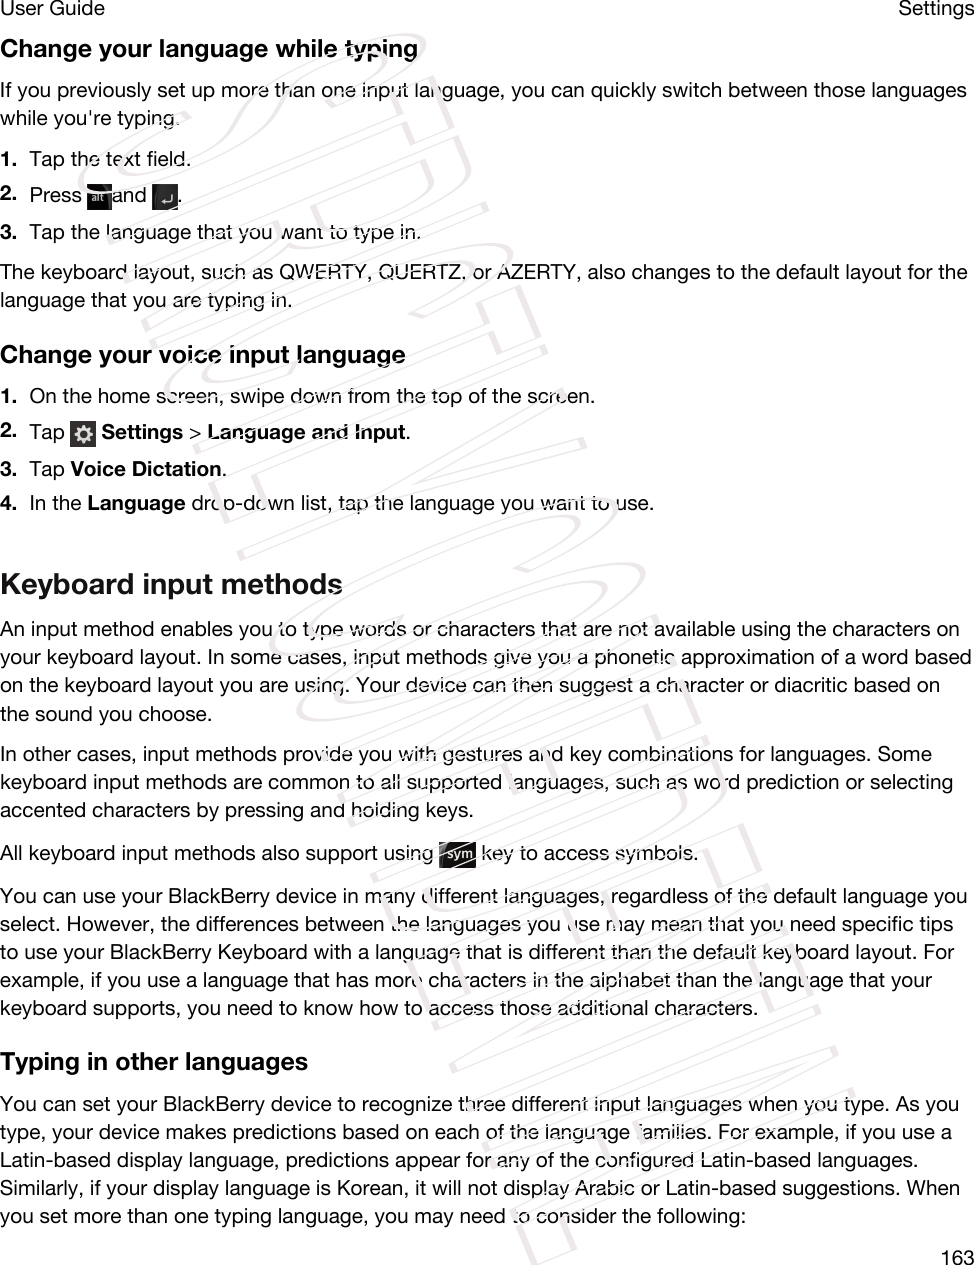 Change your language while typingIf you previously set up more than one input language, you can quickly switch between those languages while you&apos;re typing.1. Tap the text field.2. Press  and  .3. Tap the language that you want to type in.The keyboard layout, such as QWERTY, QUERTZ, or AZERTY, also changes to the default layout for the language that you are typing in.Change your voice input language1. On the home screen, swipe down from the top of the screen.2. Tap   Settings &gt; Language and Input.3. Tap Voice Dictation.4. In the Language drop-down list, tap the language you want to use.Keyboard input methodsAn input method enables you to type words or characters that are not available using the characters on your keyboard layout. In some cases, input methods give you a phonetic approximation of a word based on the keyboard layout you are using. Your device can then suggest a character or diacritic based on the sound you choose.In other cases, input methods provide you with gestures and key combinations for languages. Some keyboard input methods are common to all supported languages, such as word prediction or selecting accented characters by pressing and holding keys.All keyboard input methods also support using   key to access symbols.You can use your BlackBerry device in many different languages, regardless of the default language you select. However, the differences between the languages you use may mean that you need specific tips to use your BlackBerry Keyboard with a language that is different than the default keyboard layout. For example, if you use a language that has more characters in the alphabet than the language that your keyboard supports, you need to know how to access those additional characters.Typing in other languagesYou can set your BlackBerry device to recognize three different input languages when you type. As you type, your device makes predictions based on each of the language families. For example, if you use a Latin-based display language, predictions appear for any of the configured Latin-based languages. Similarly, if your display language is Korean, it will not display Arabic or Latin-based suggestions. When you set more than one typing language, you may need to consider the following:SettingsUser Guide163STRICTLY CONFIDENTIAL